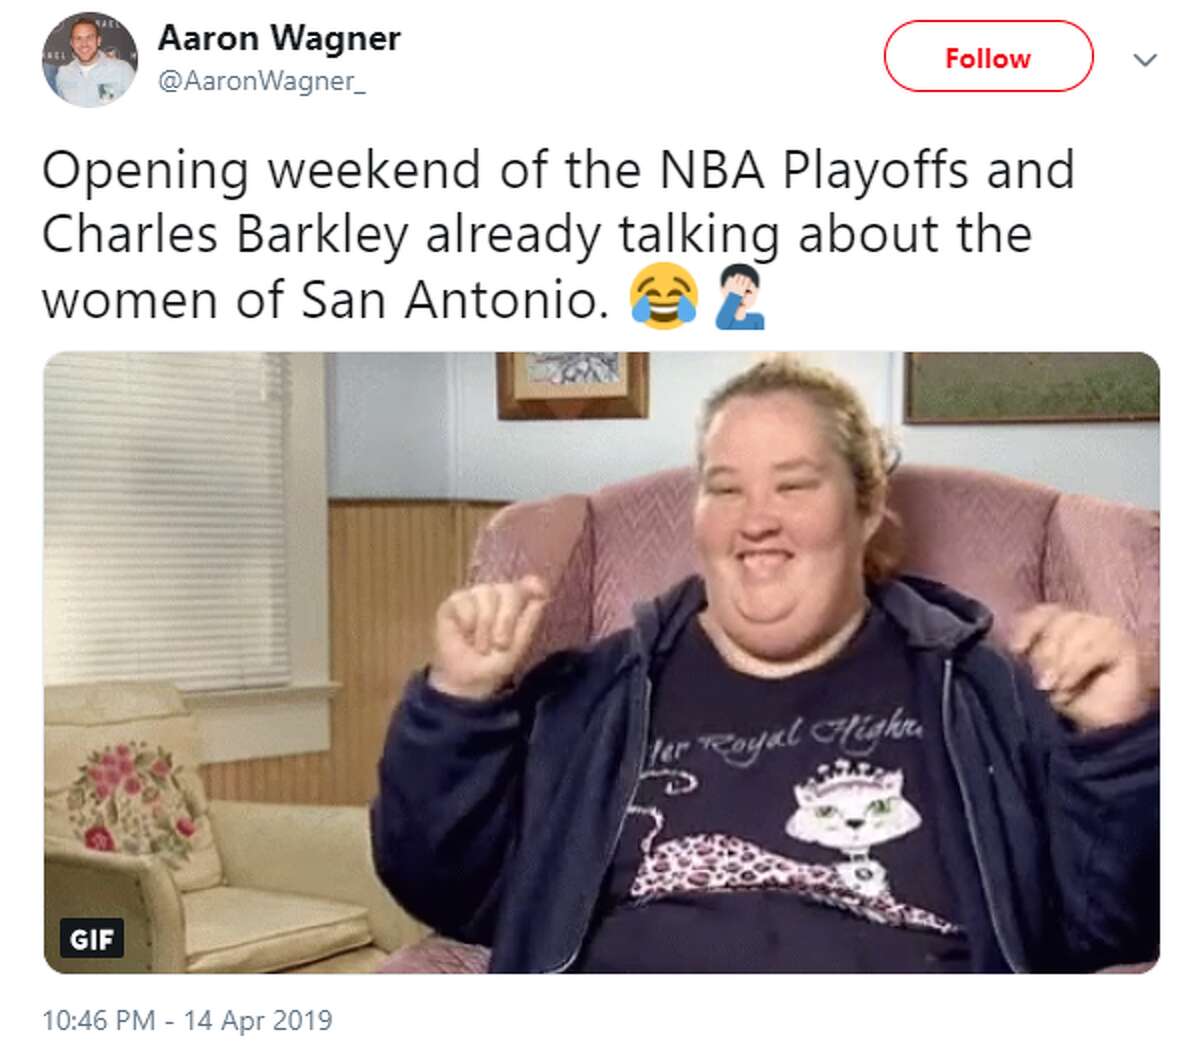 @AaronWagner_: Opening weekend of the NBA Playoffs and Charles Barkley already talking about the women of San Antonio.